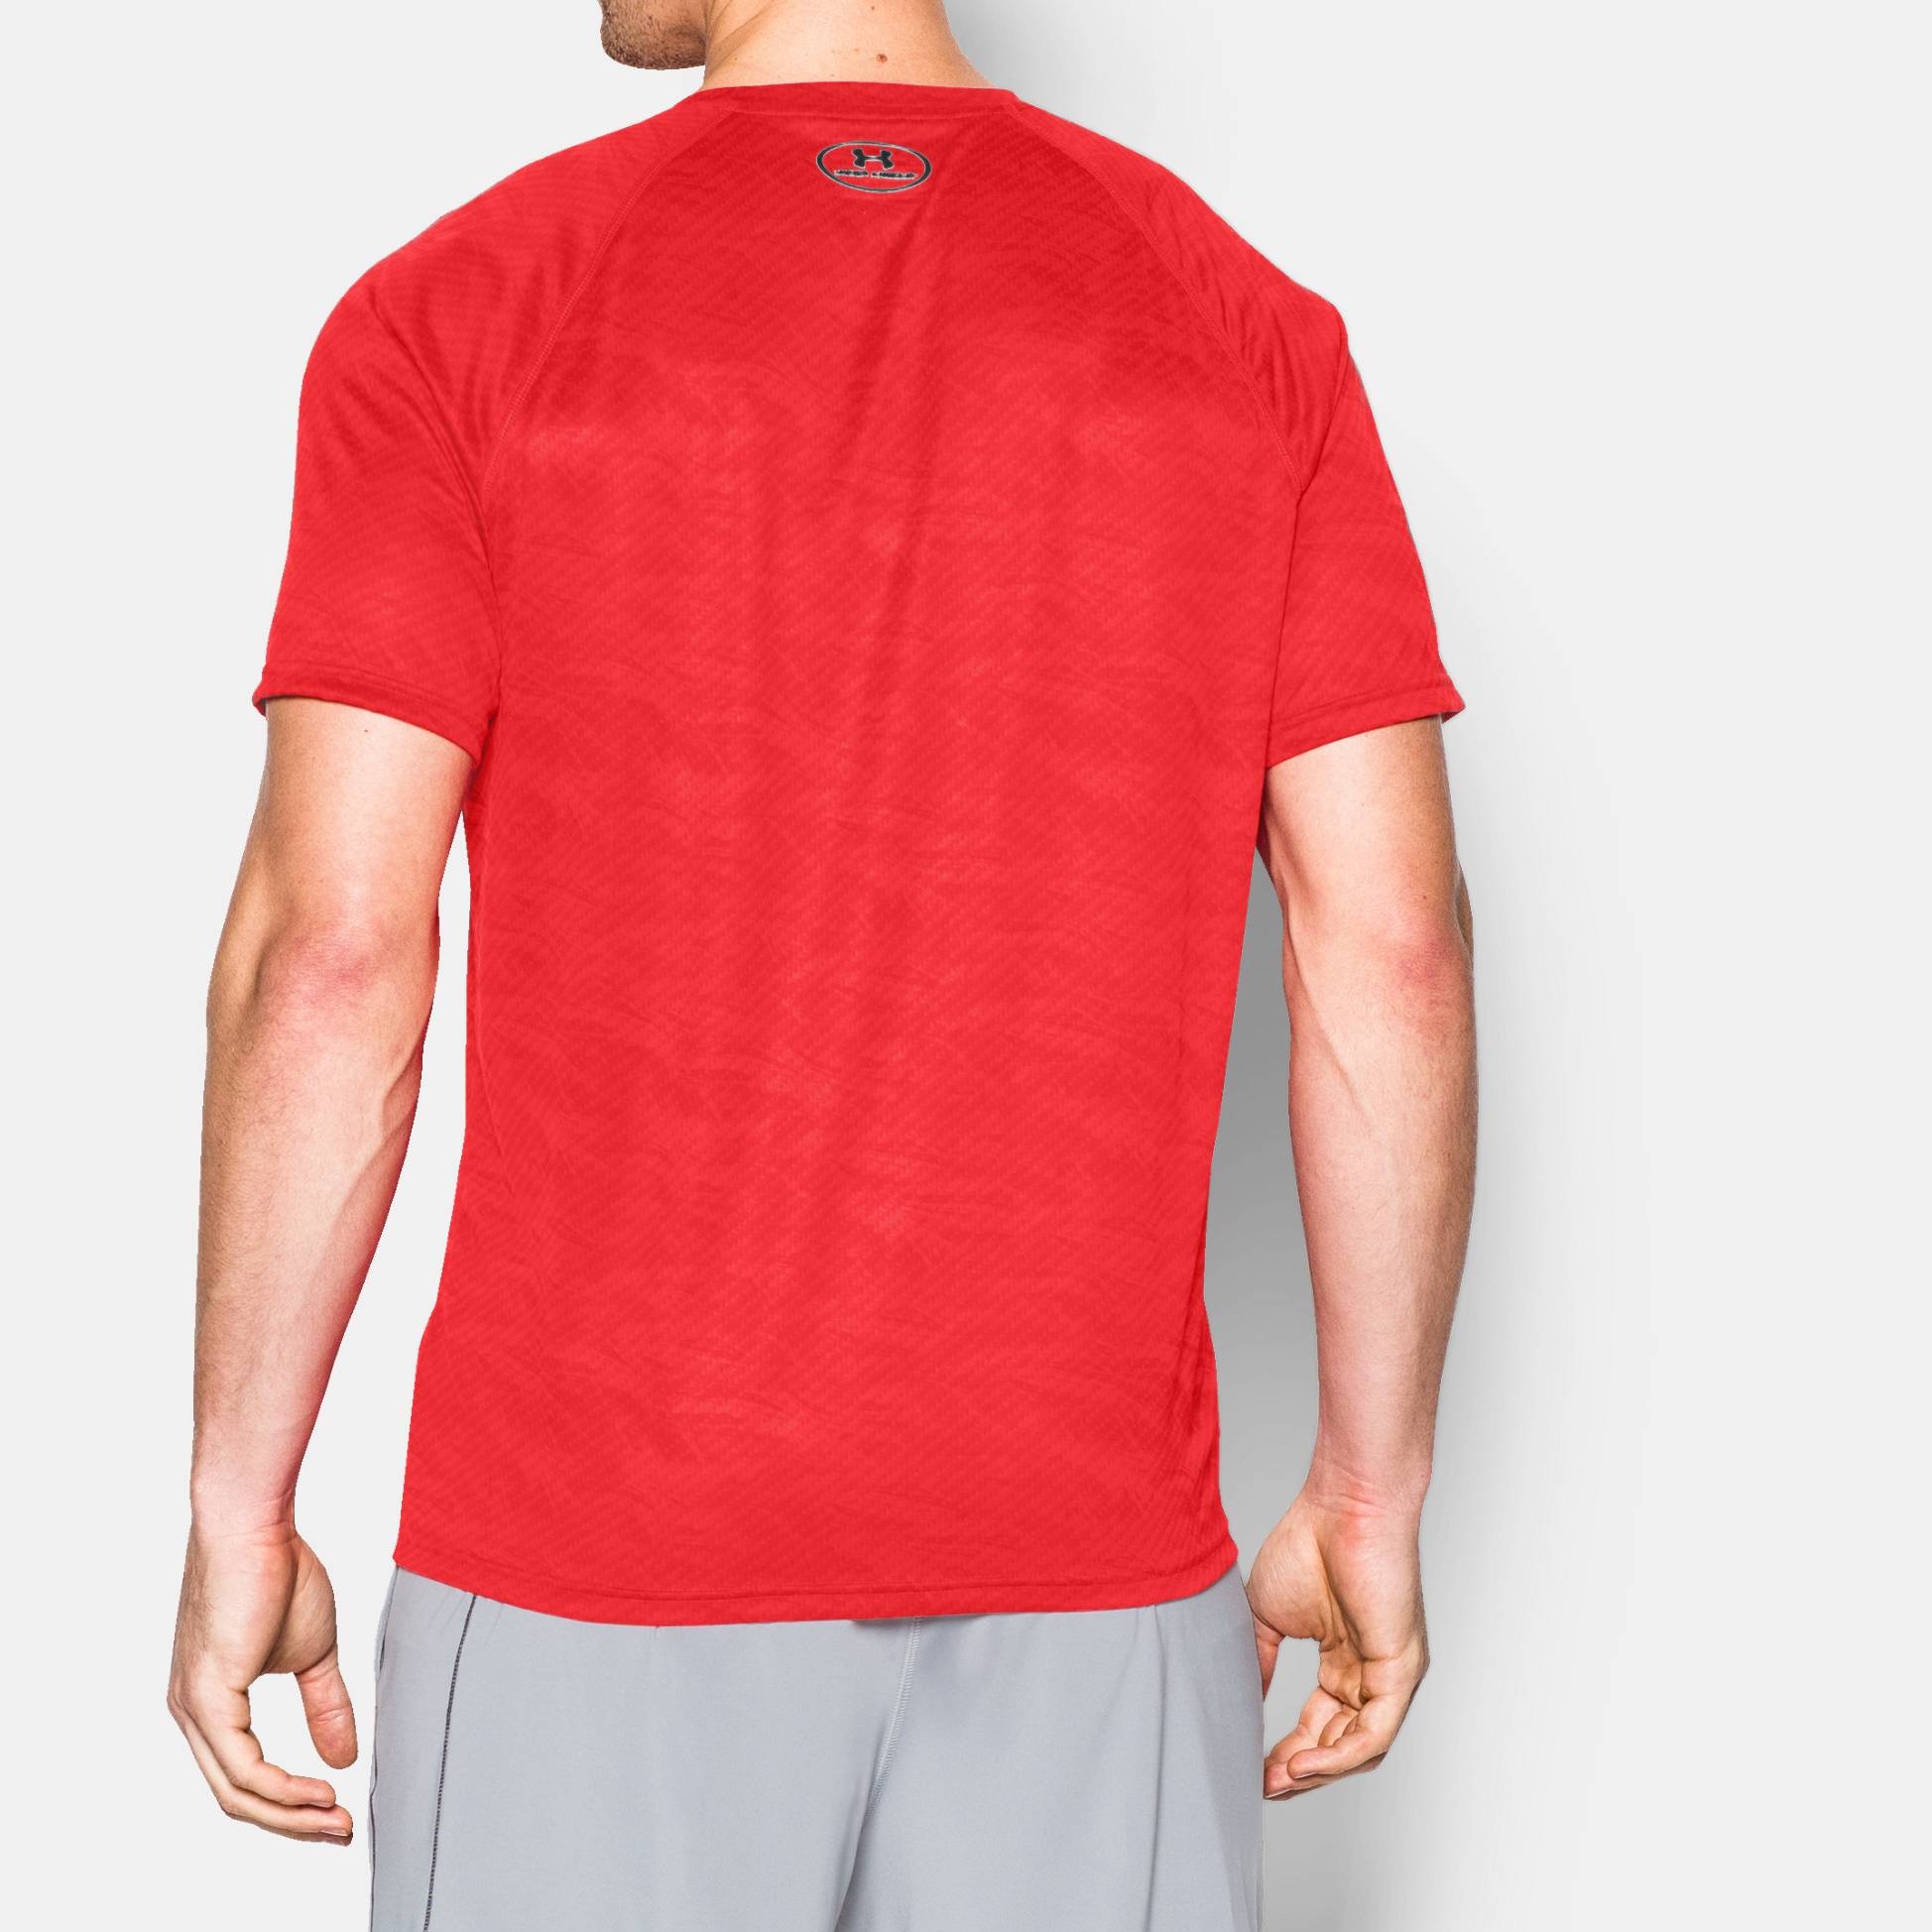  -  under armour Boxed Logo Printed T-Shirt